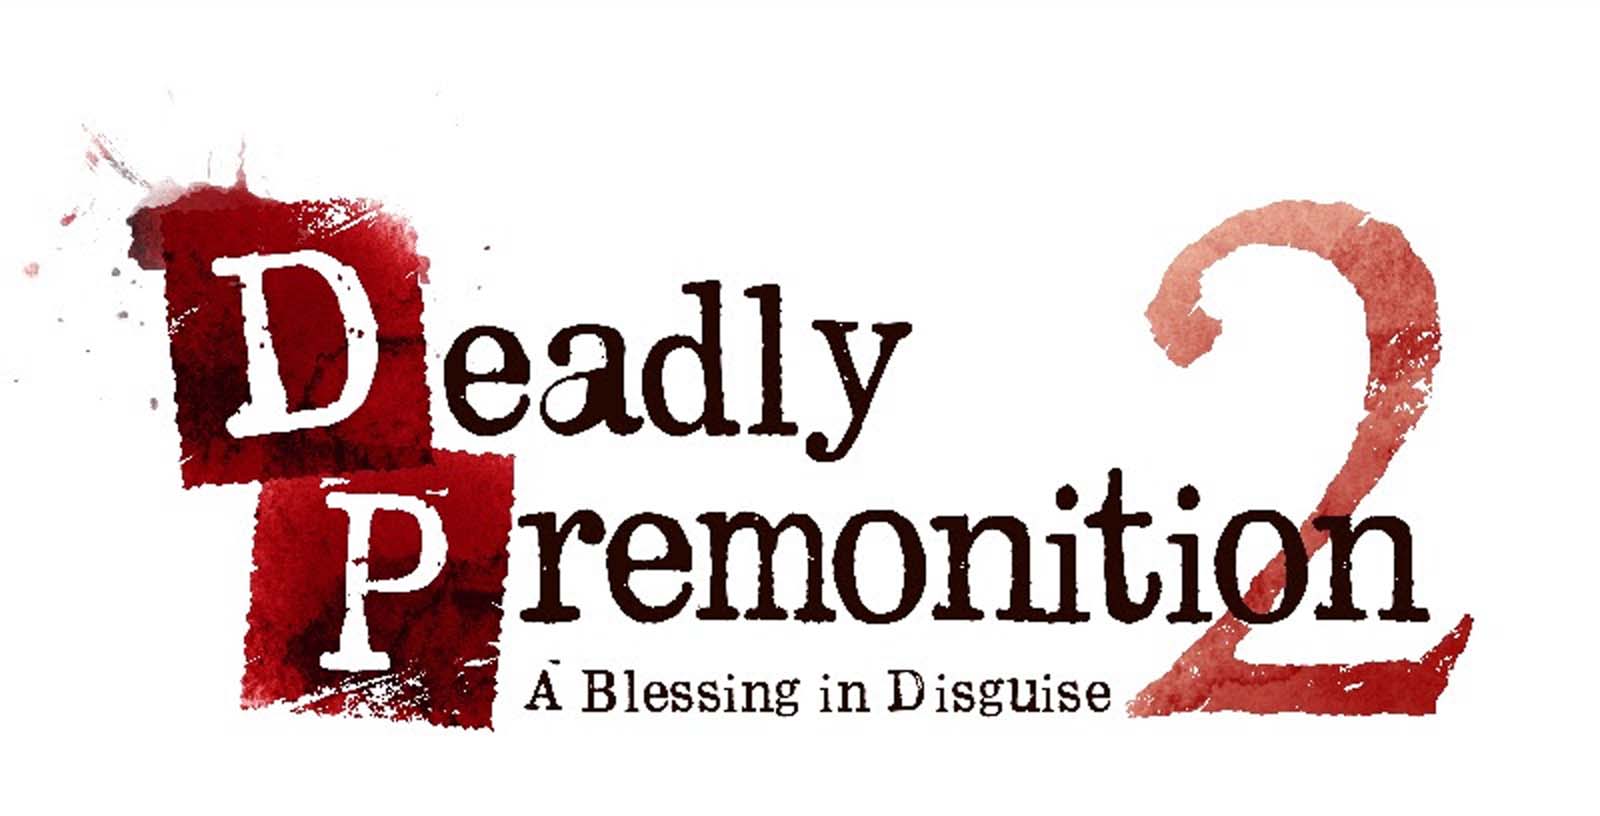 deadly premonition 2 physical release